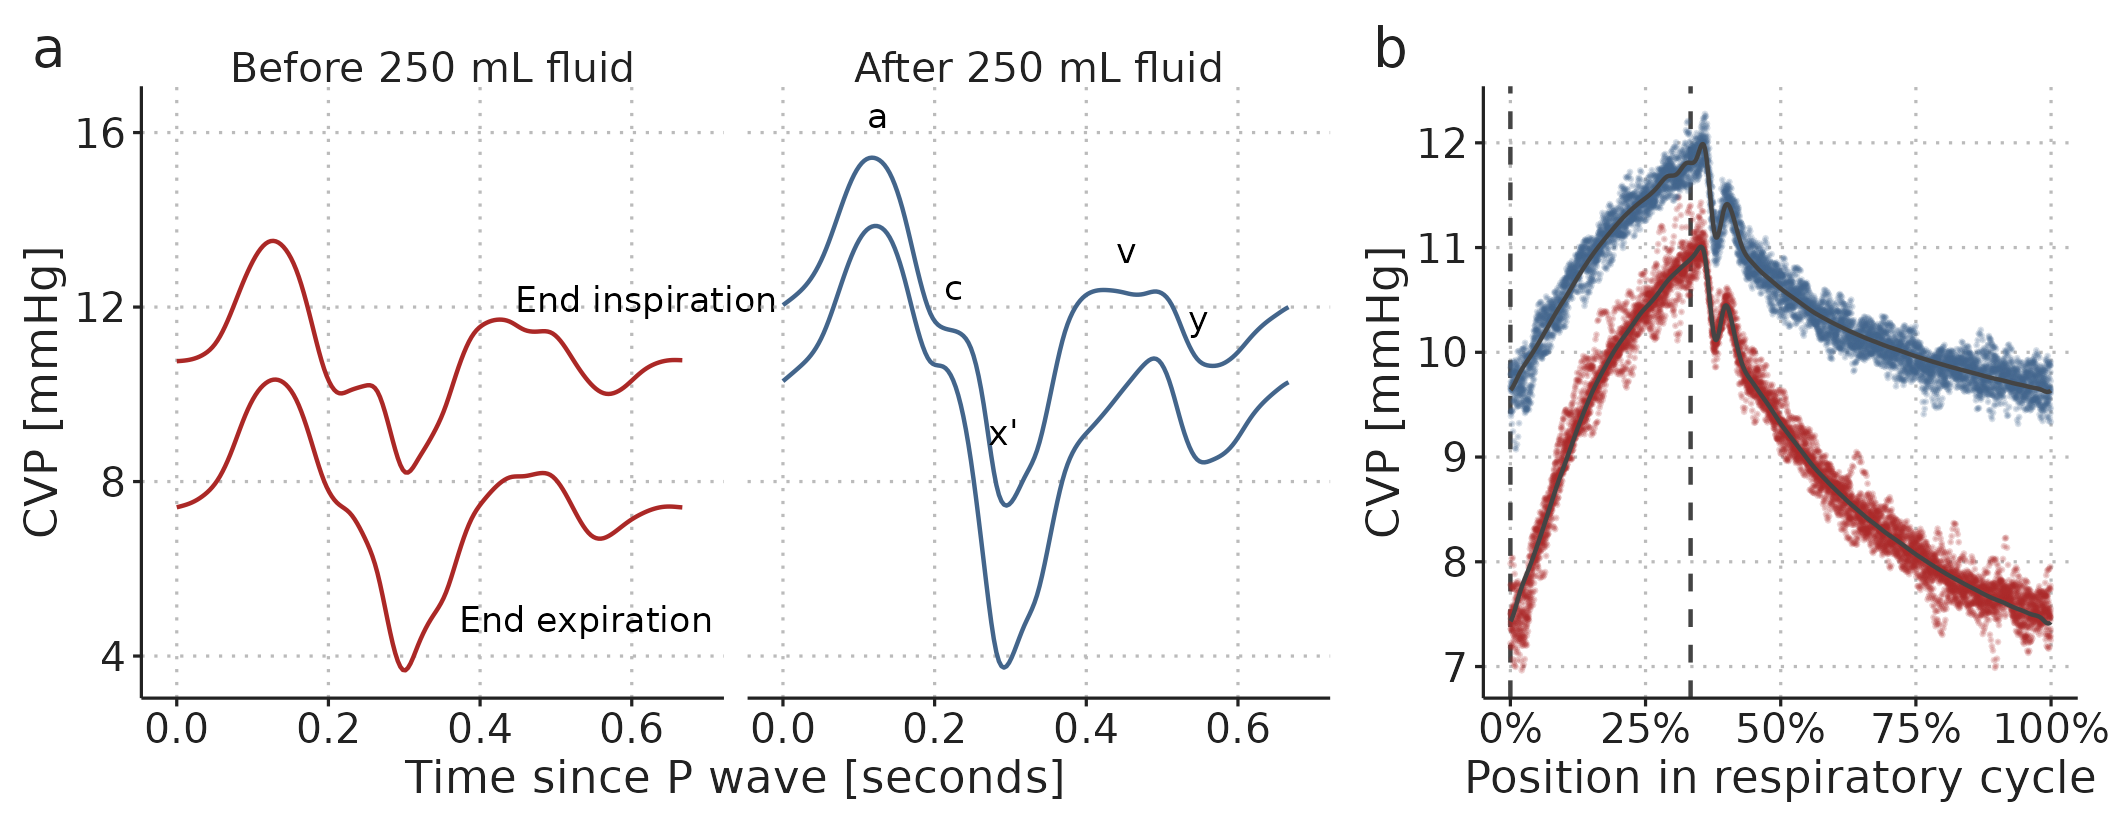 Visualisation of a GAM fitted to two 60-second CVP waveforms, before and after a 250 ml fluid bolus. a) A cardiac cycle at two fixed positions in the respiratory cycle (end expiration and end inspiration) before and after fluid administration. b) The effect of ventilation alone. Coloured dots are partial residuals, illustrating the variation in data not represented in the model. Vertical, dashed, lines show end expiration and end inspiration.